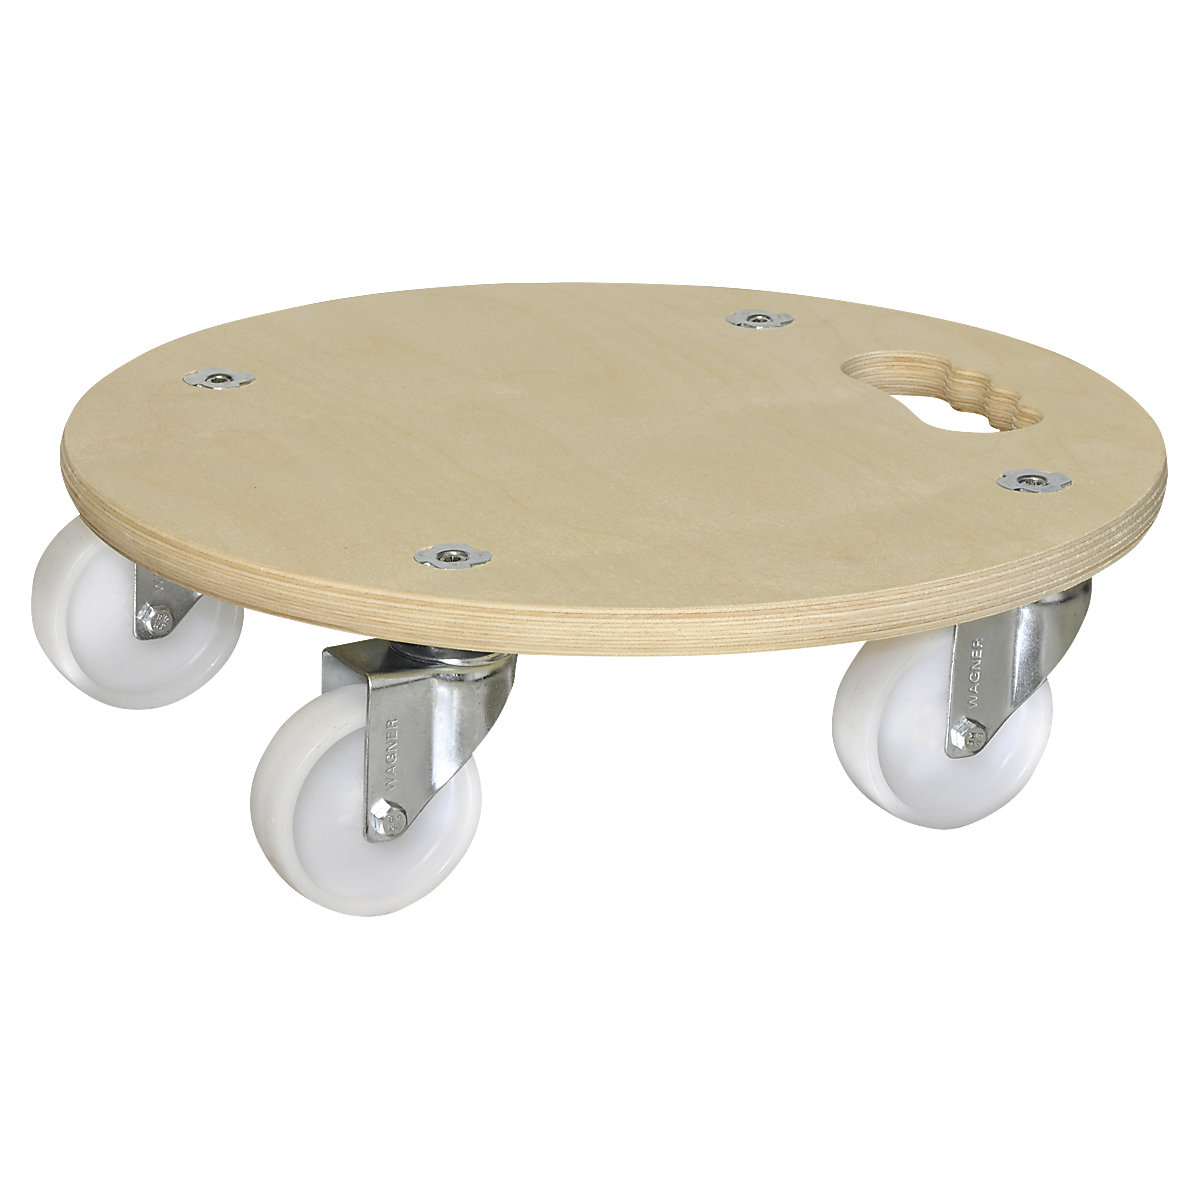 MM 1137 transport dolly, round – Wagner, Ø 380 mm, max. load 250 kg, 2+ items-4